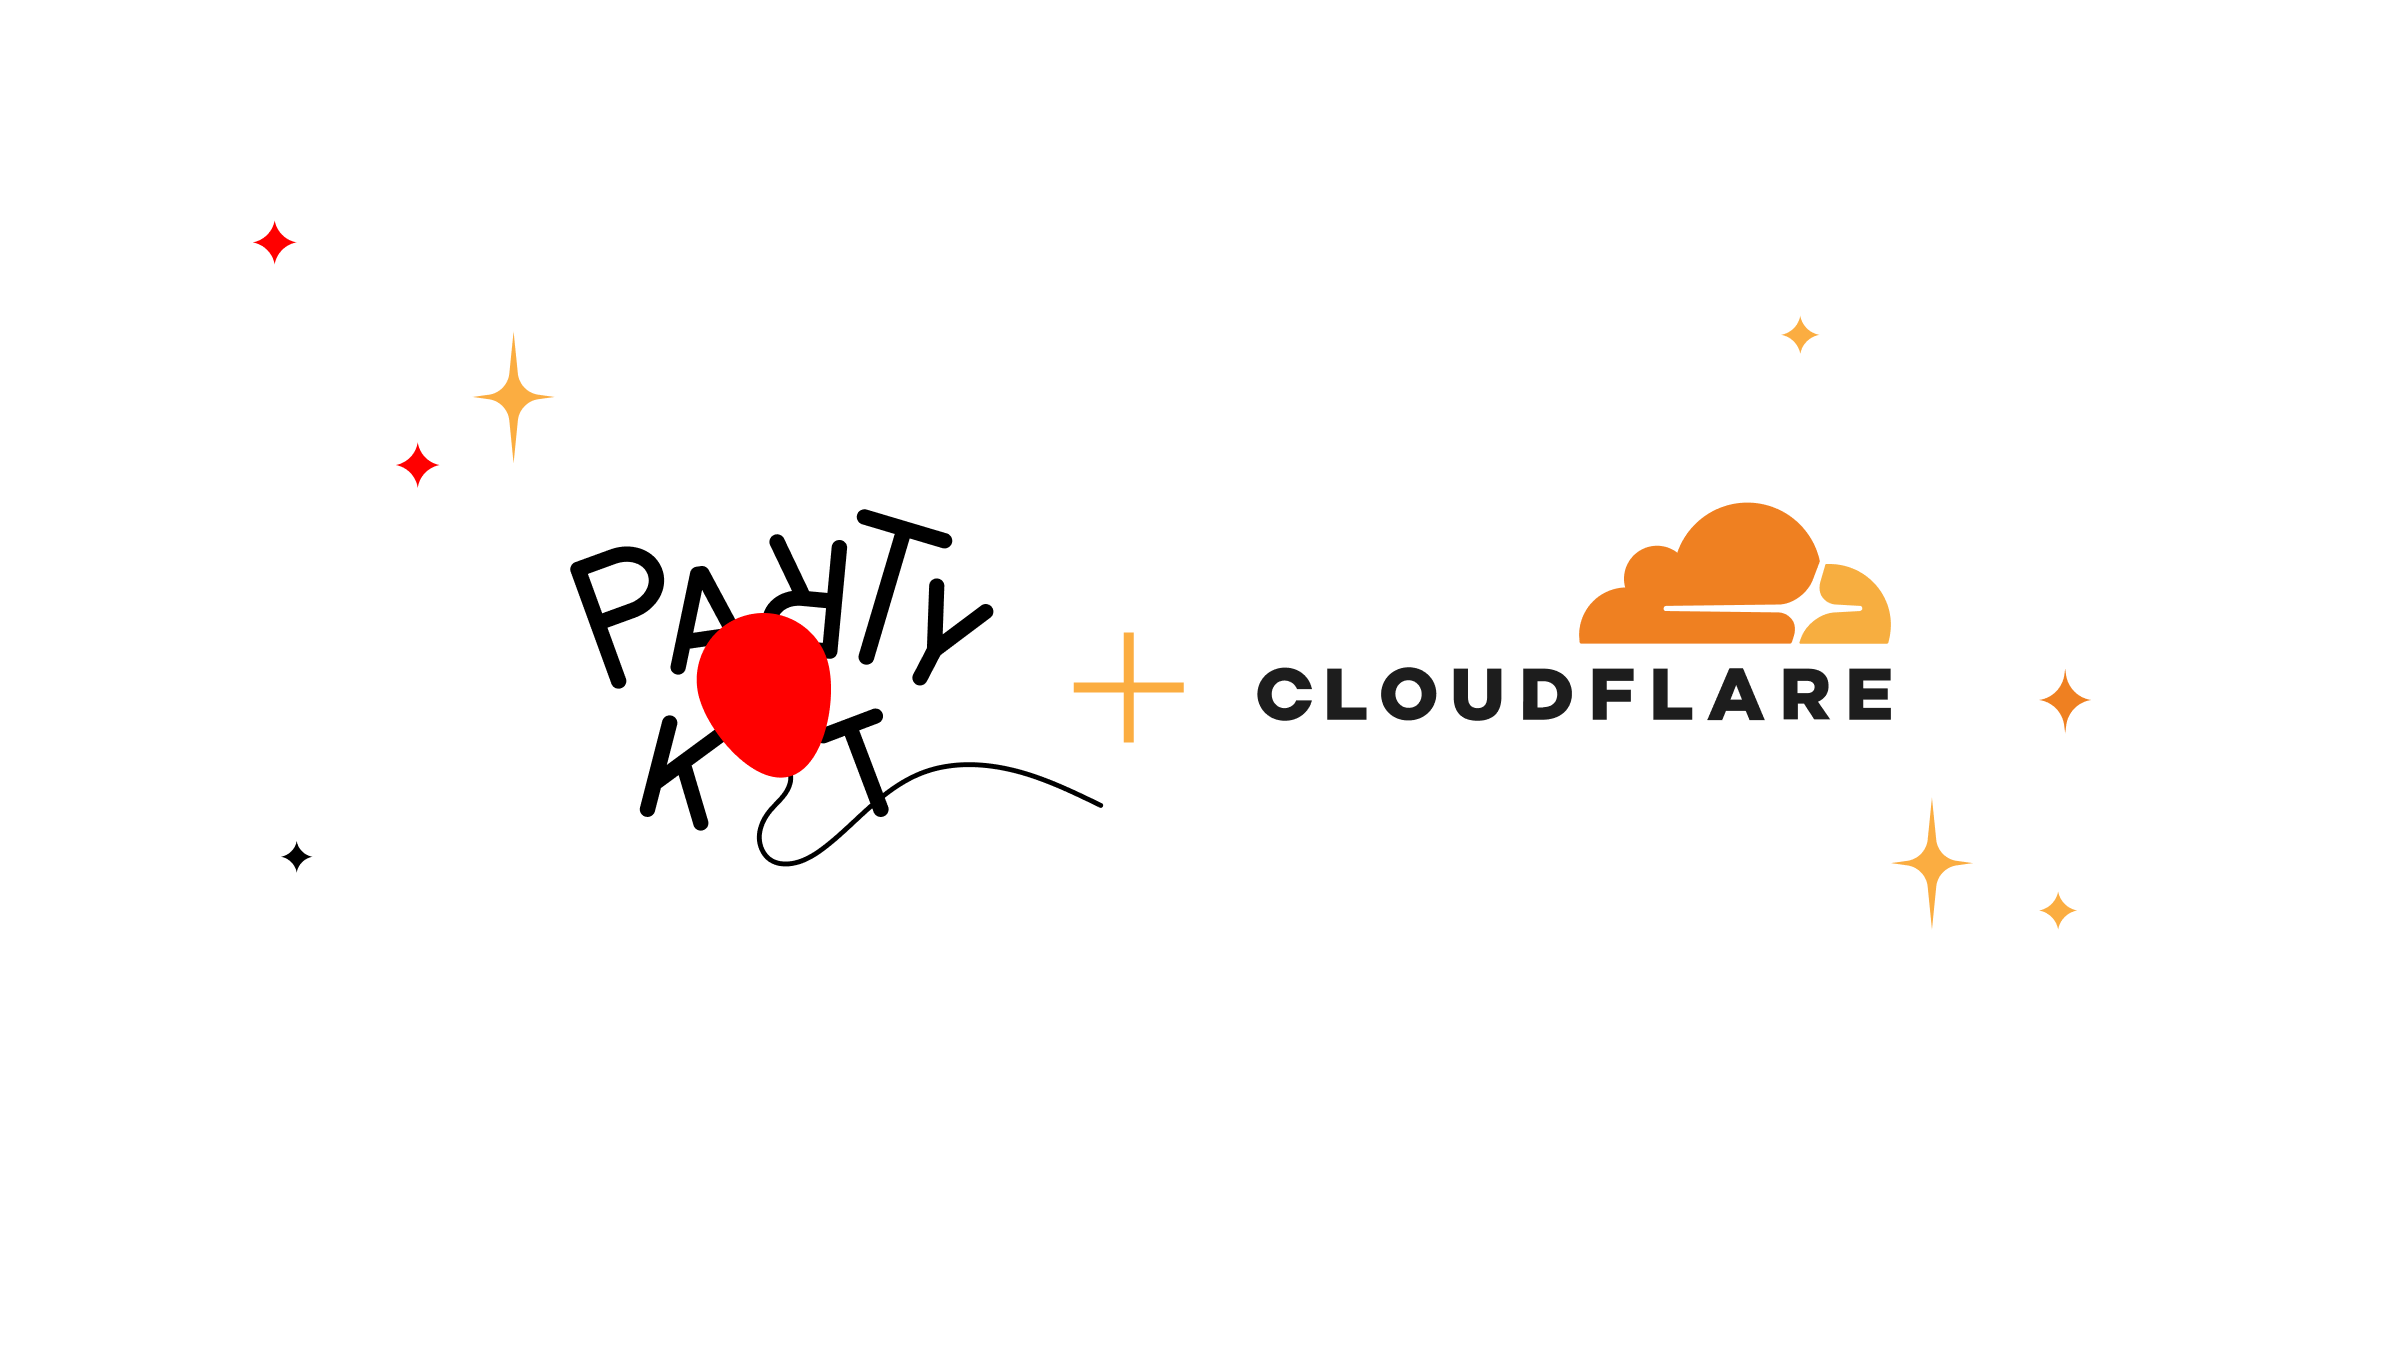 Cloudflare acquires PartyKit to allow developers to build real-time multi-user applications